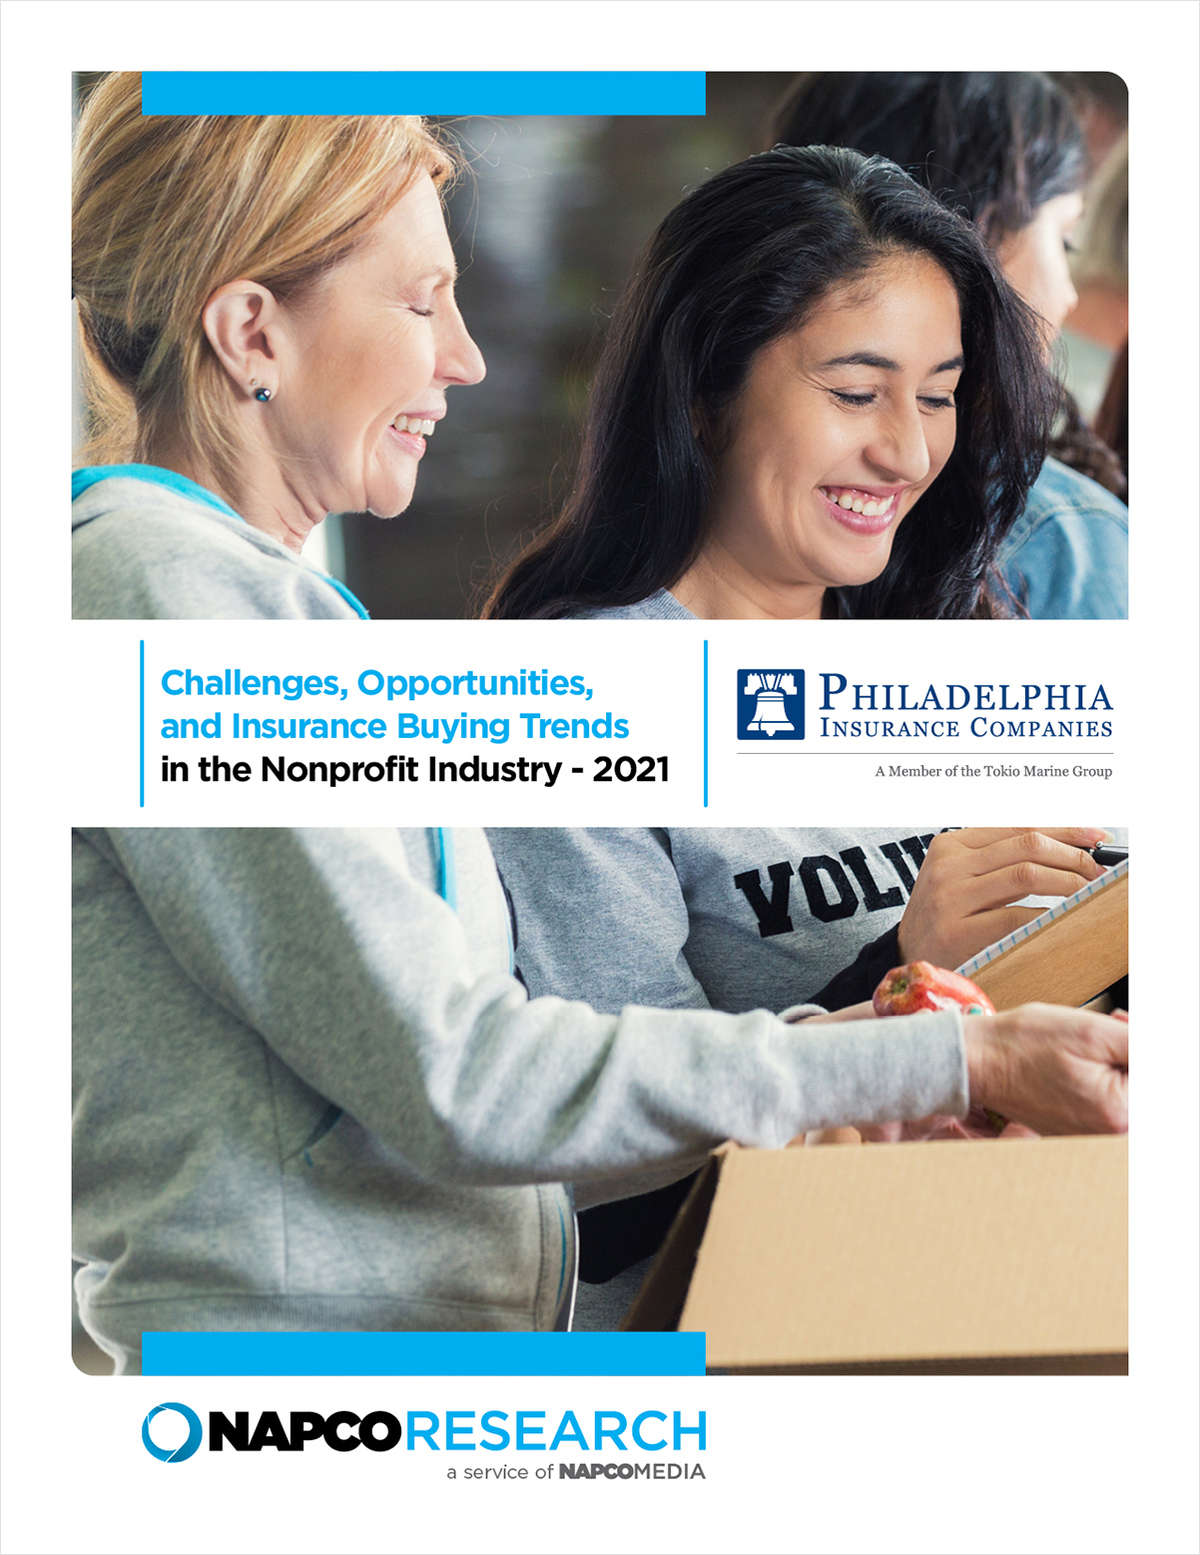 Challenges, Opportunities, and Insurance Buying Trends in the Nonprofit Industry - 2021